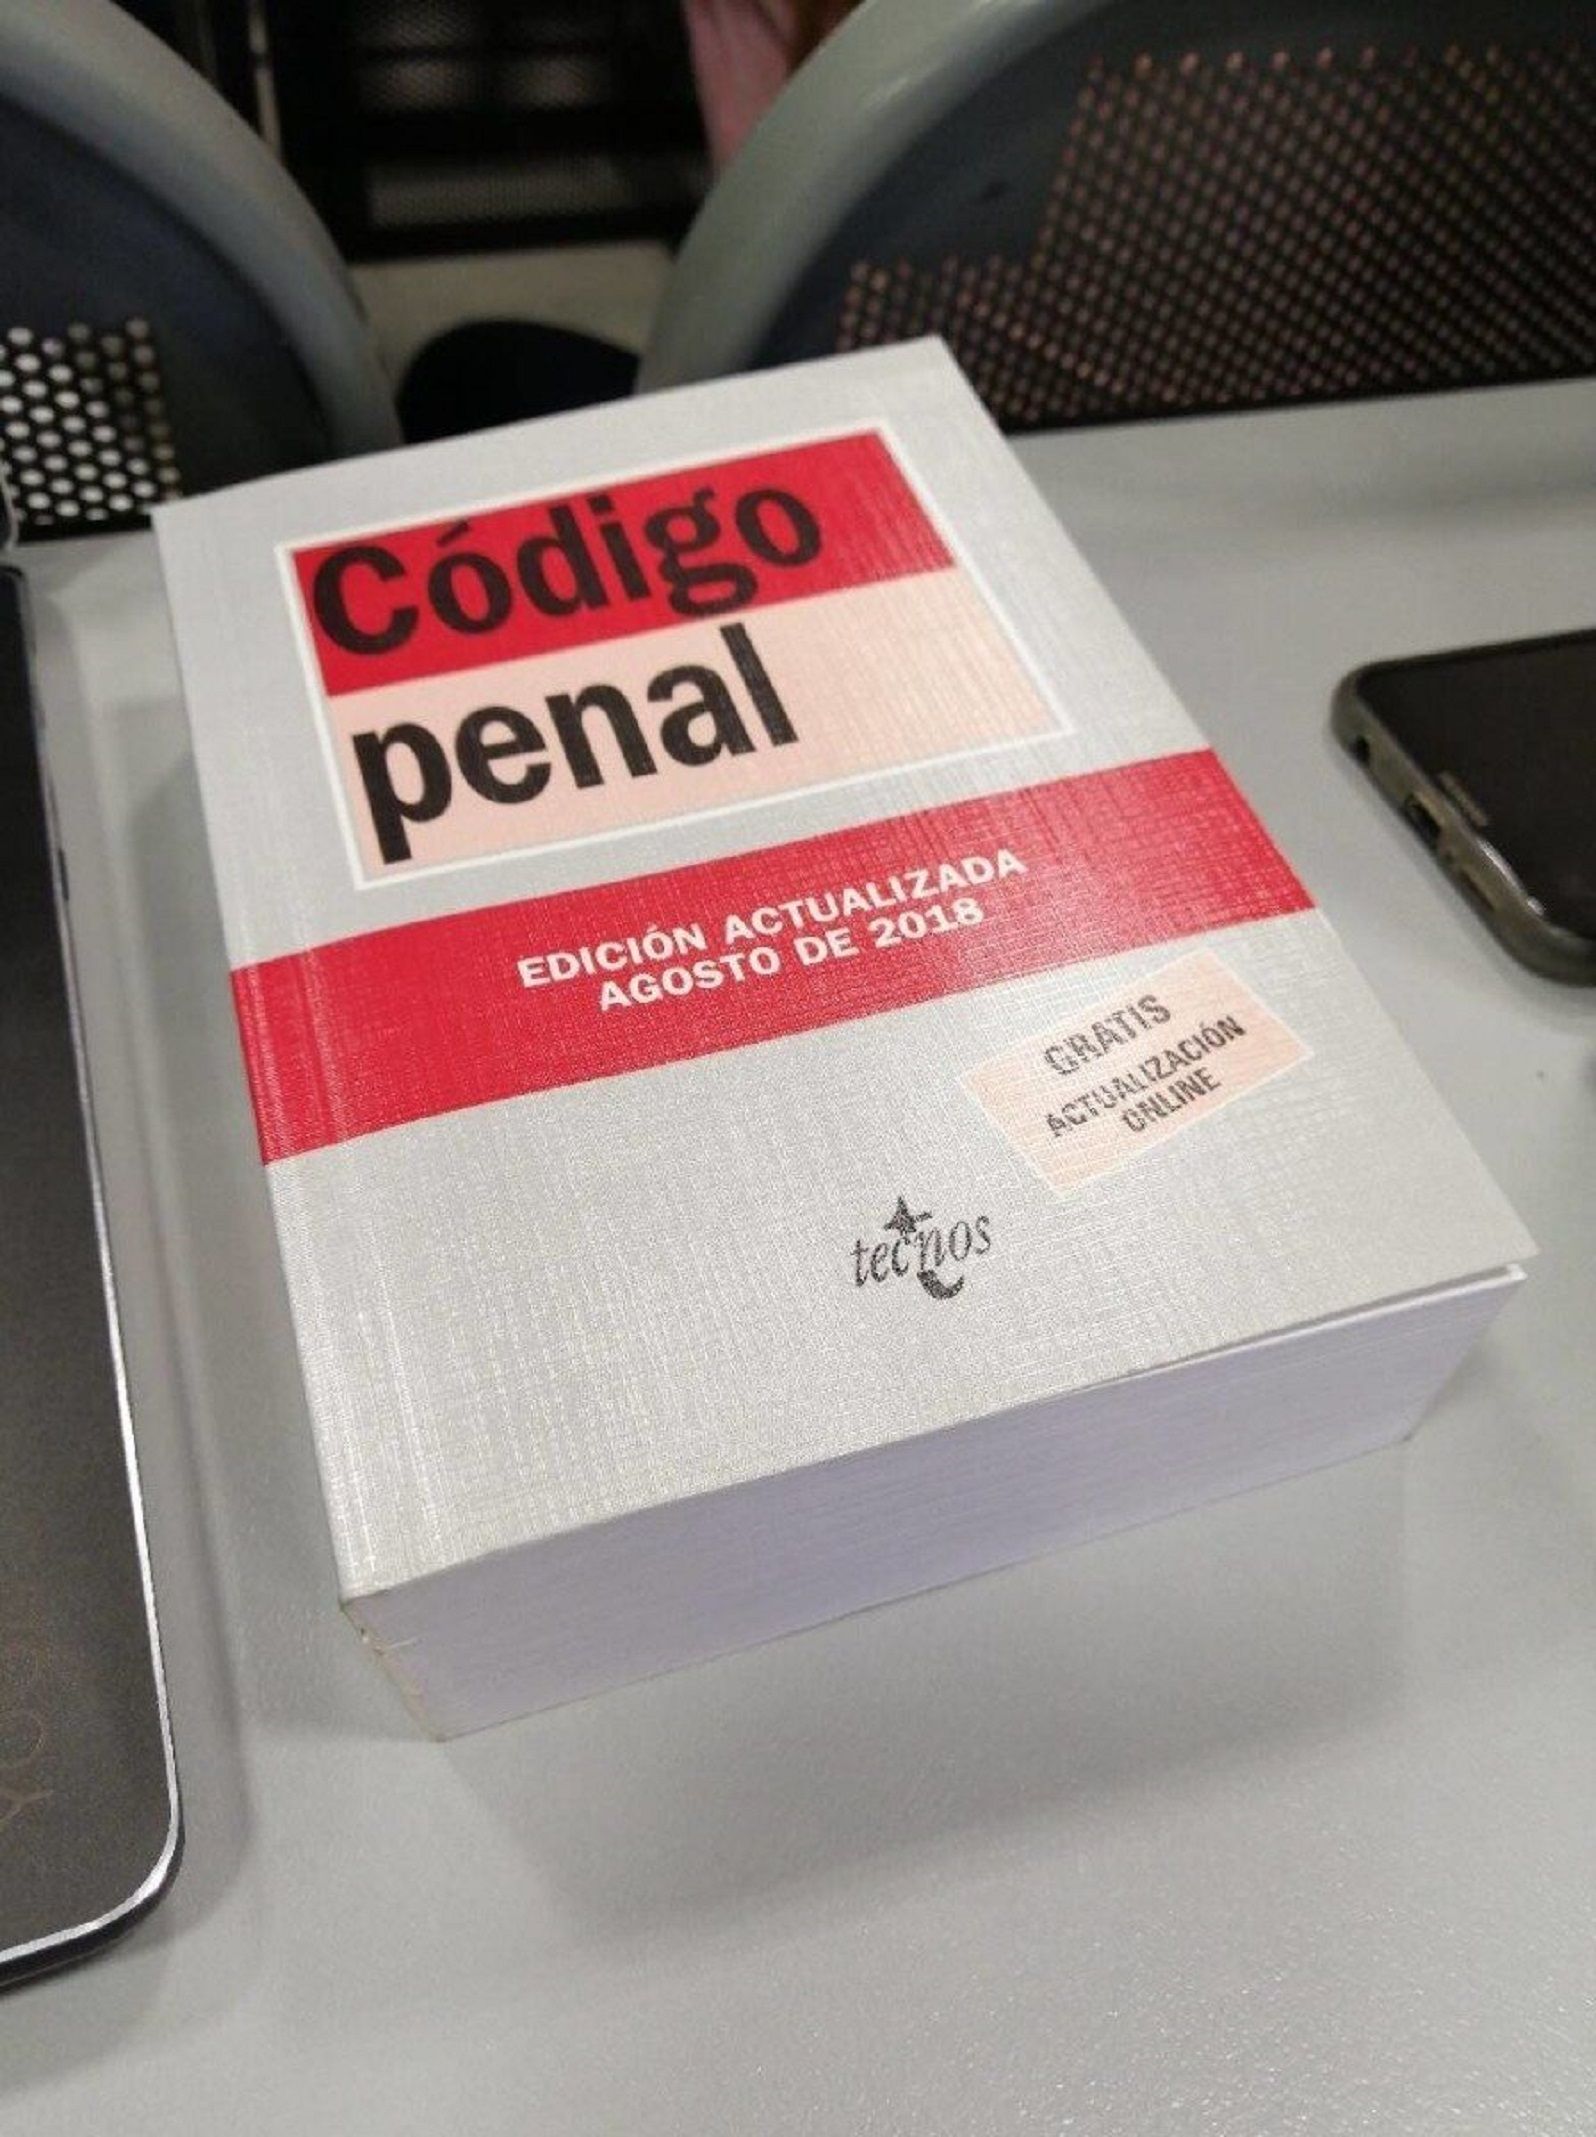 Codi Penal / Open Product Facts